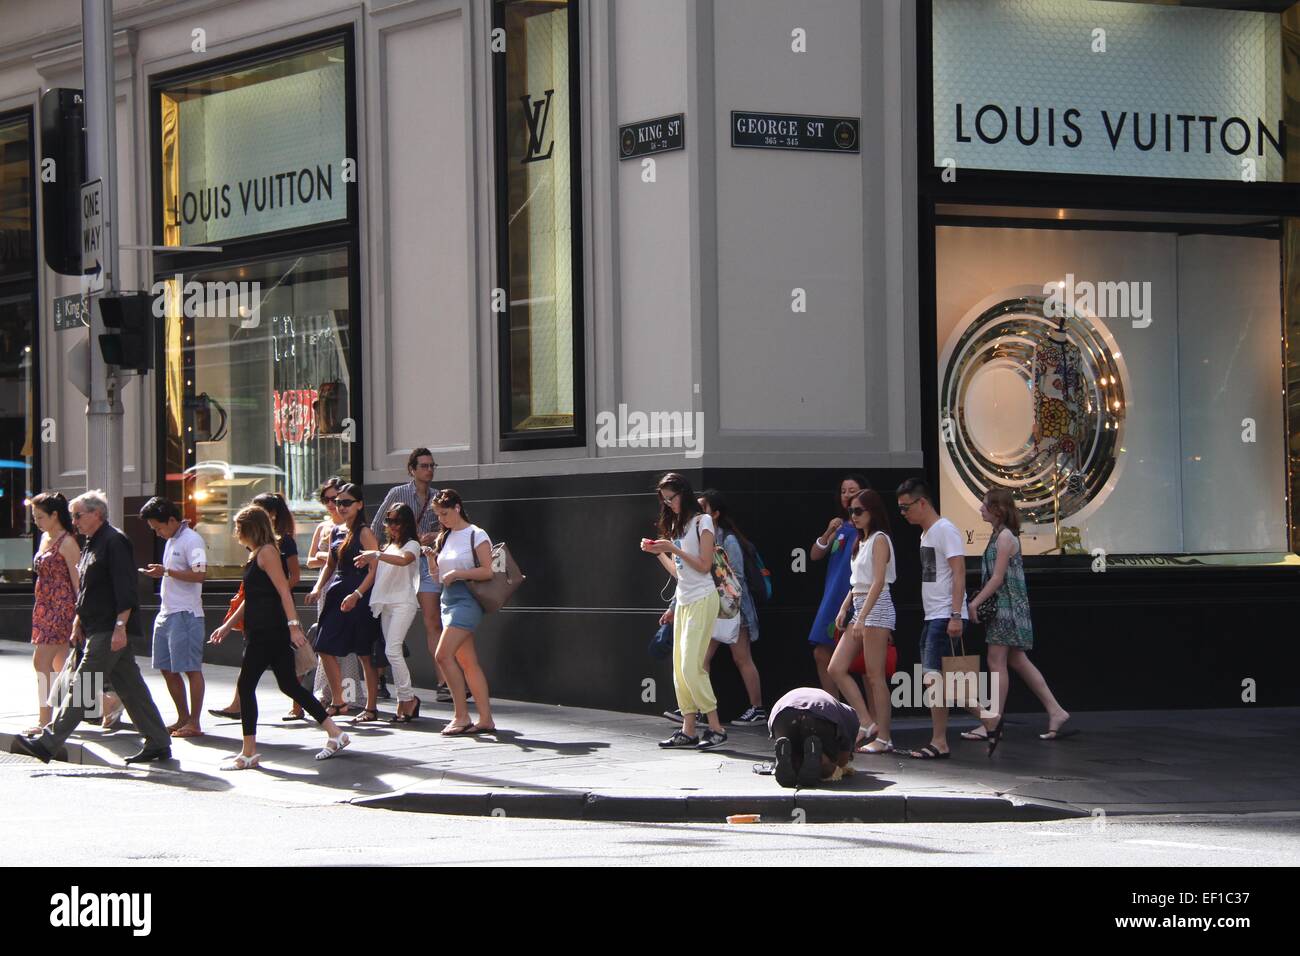 A man begs outside the Louis Vuitton store on George Street